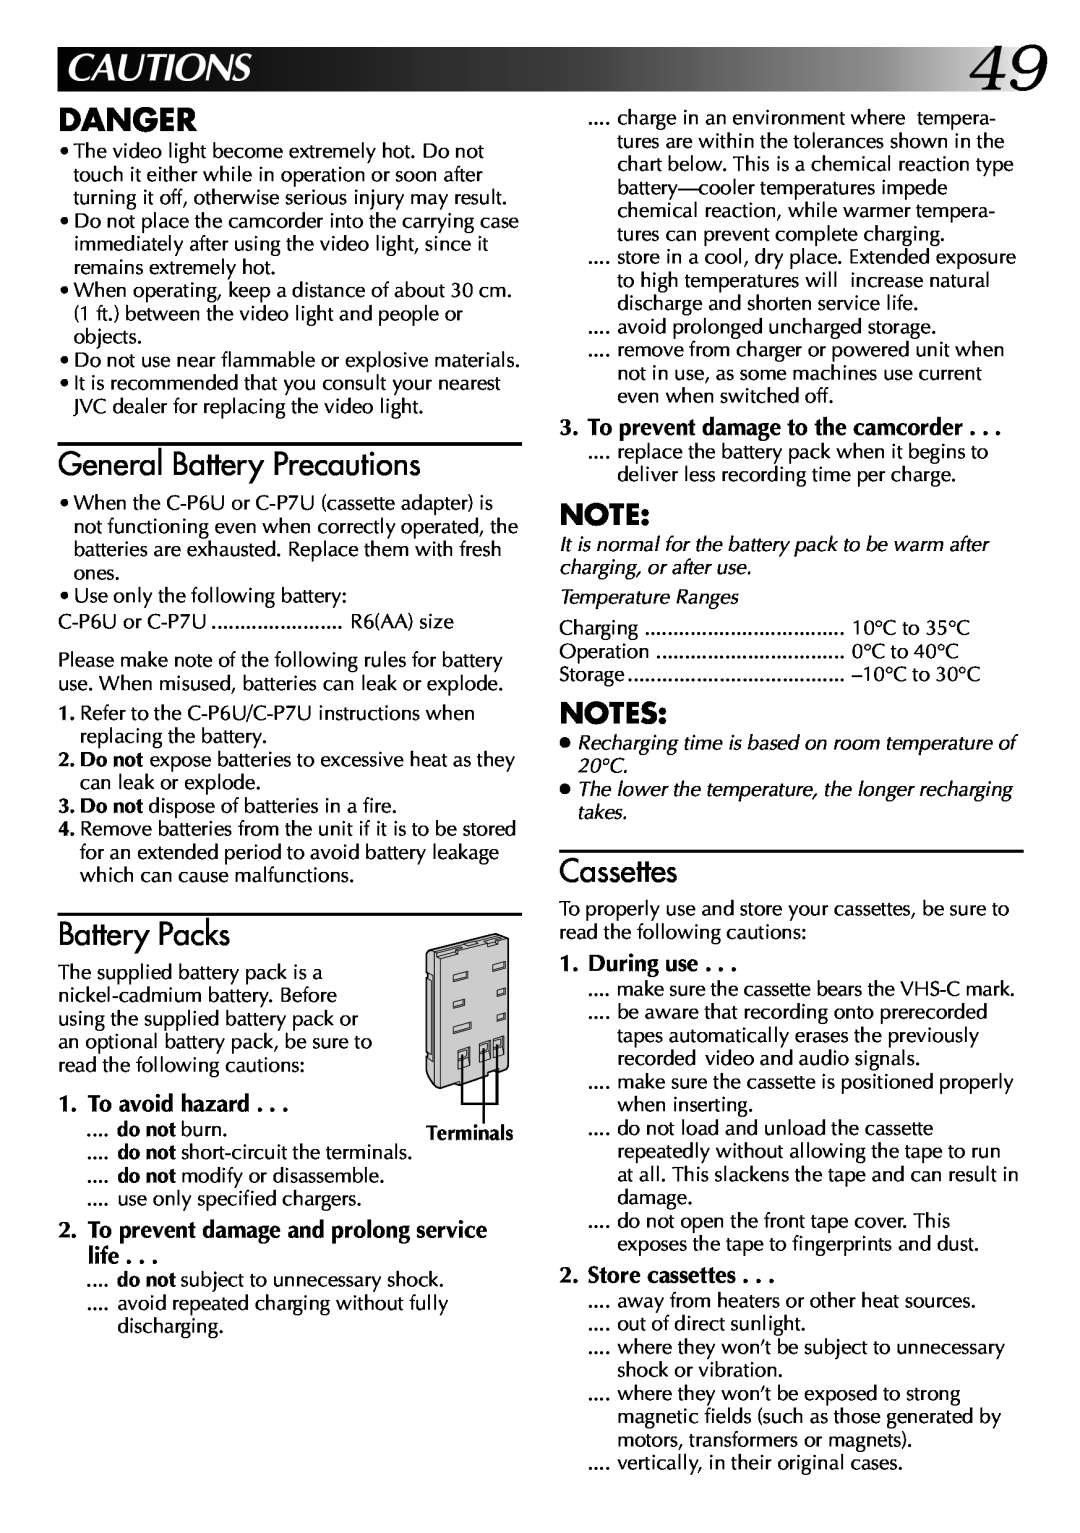 JVC LYT0002-048A CAUTIONS49, Danger, General Battery Precautions, Battery Packs, Cassettes, To avoid hazard, During use 